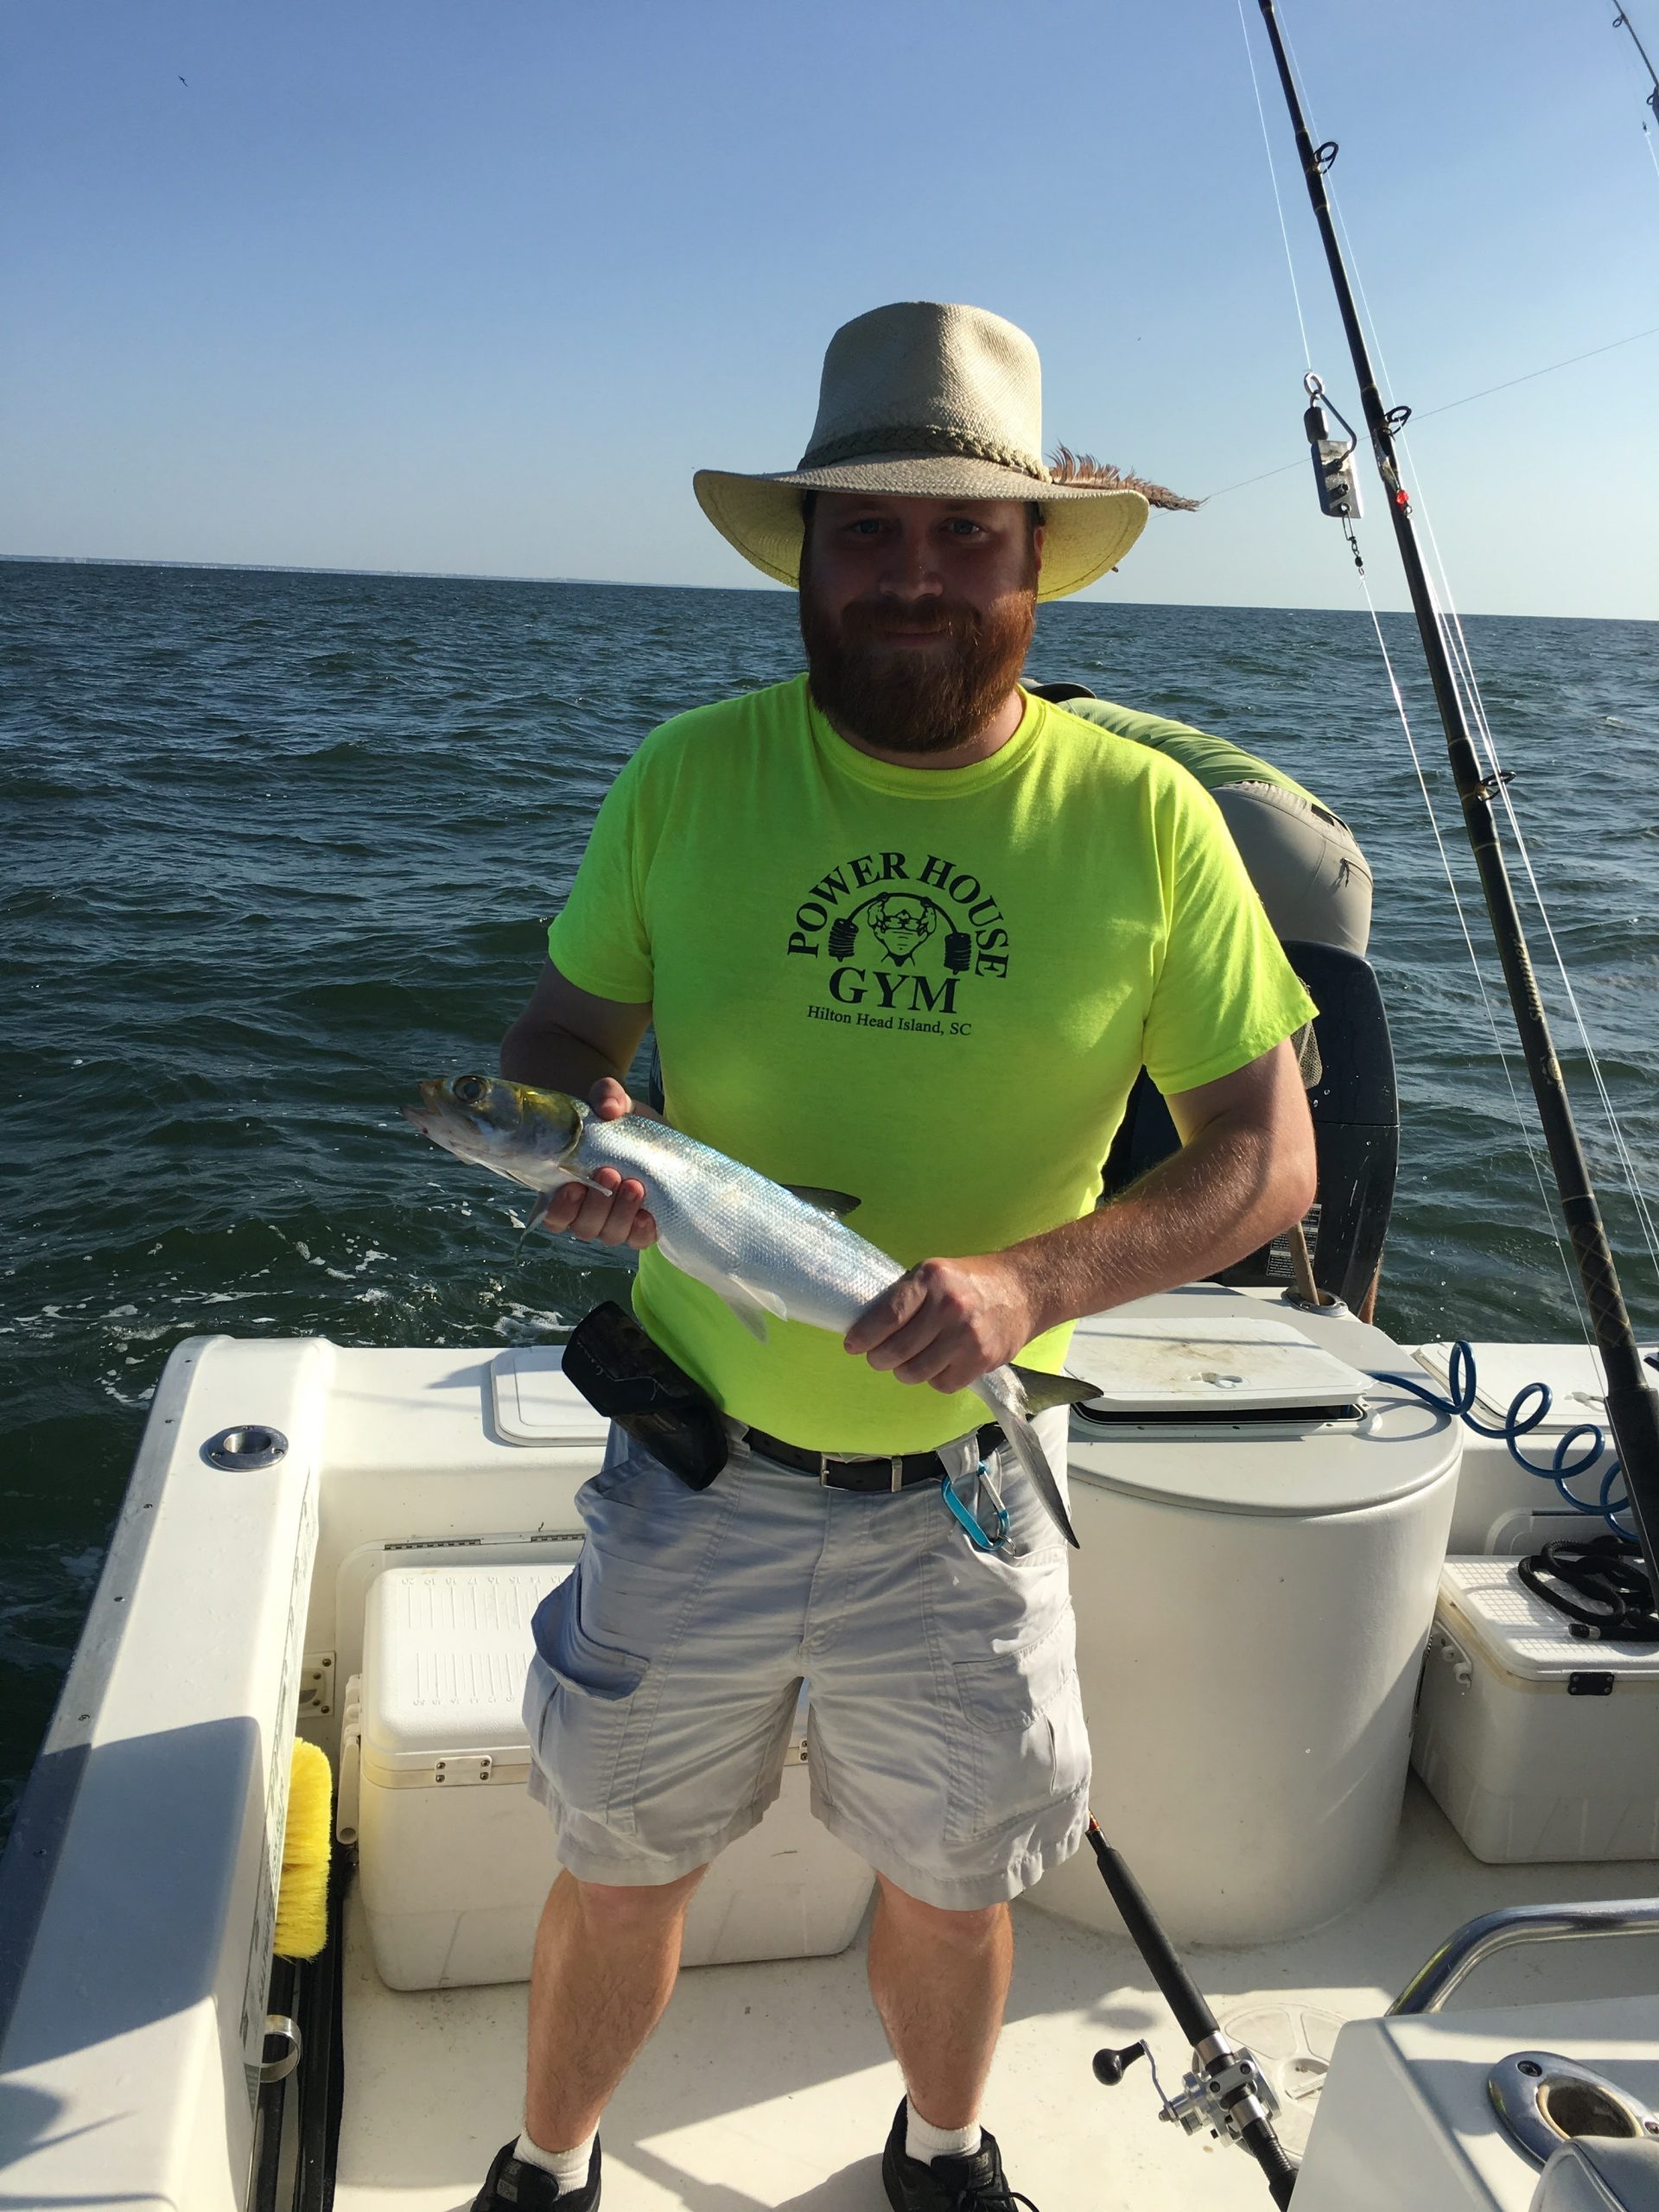 Drew’s Review of Angler Fishing Charter with Outside Hilton Head